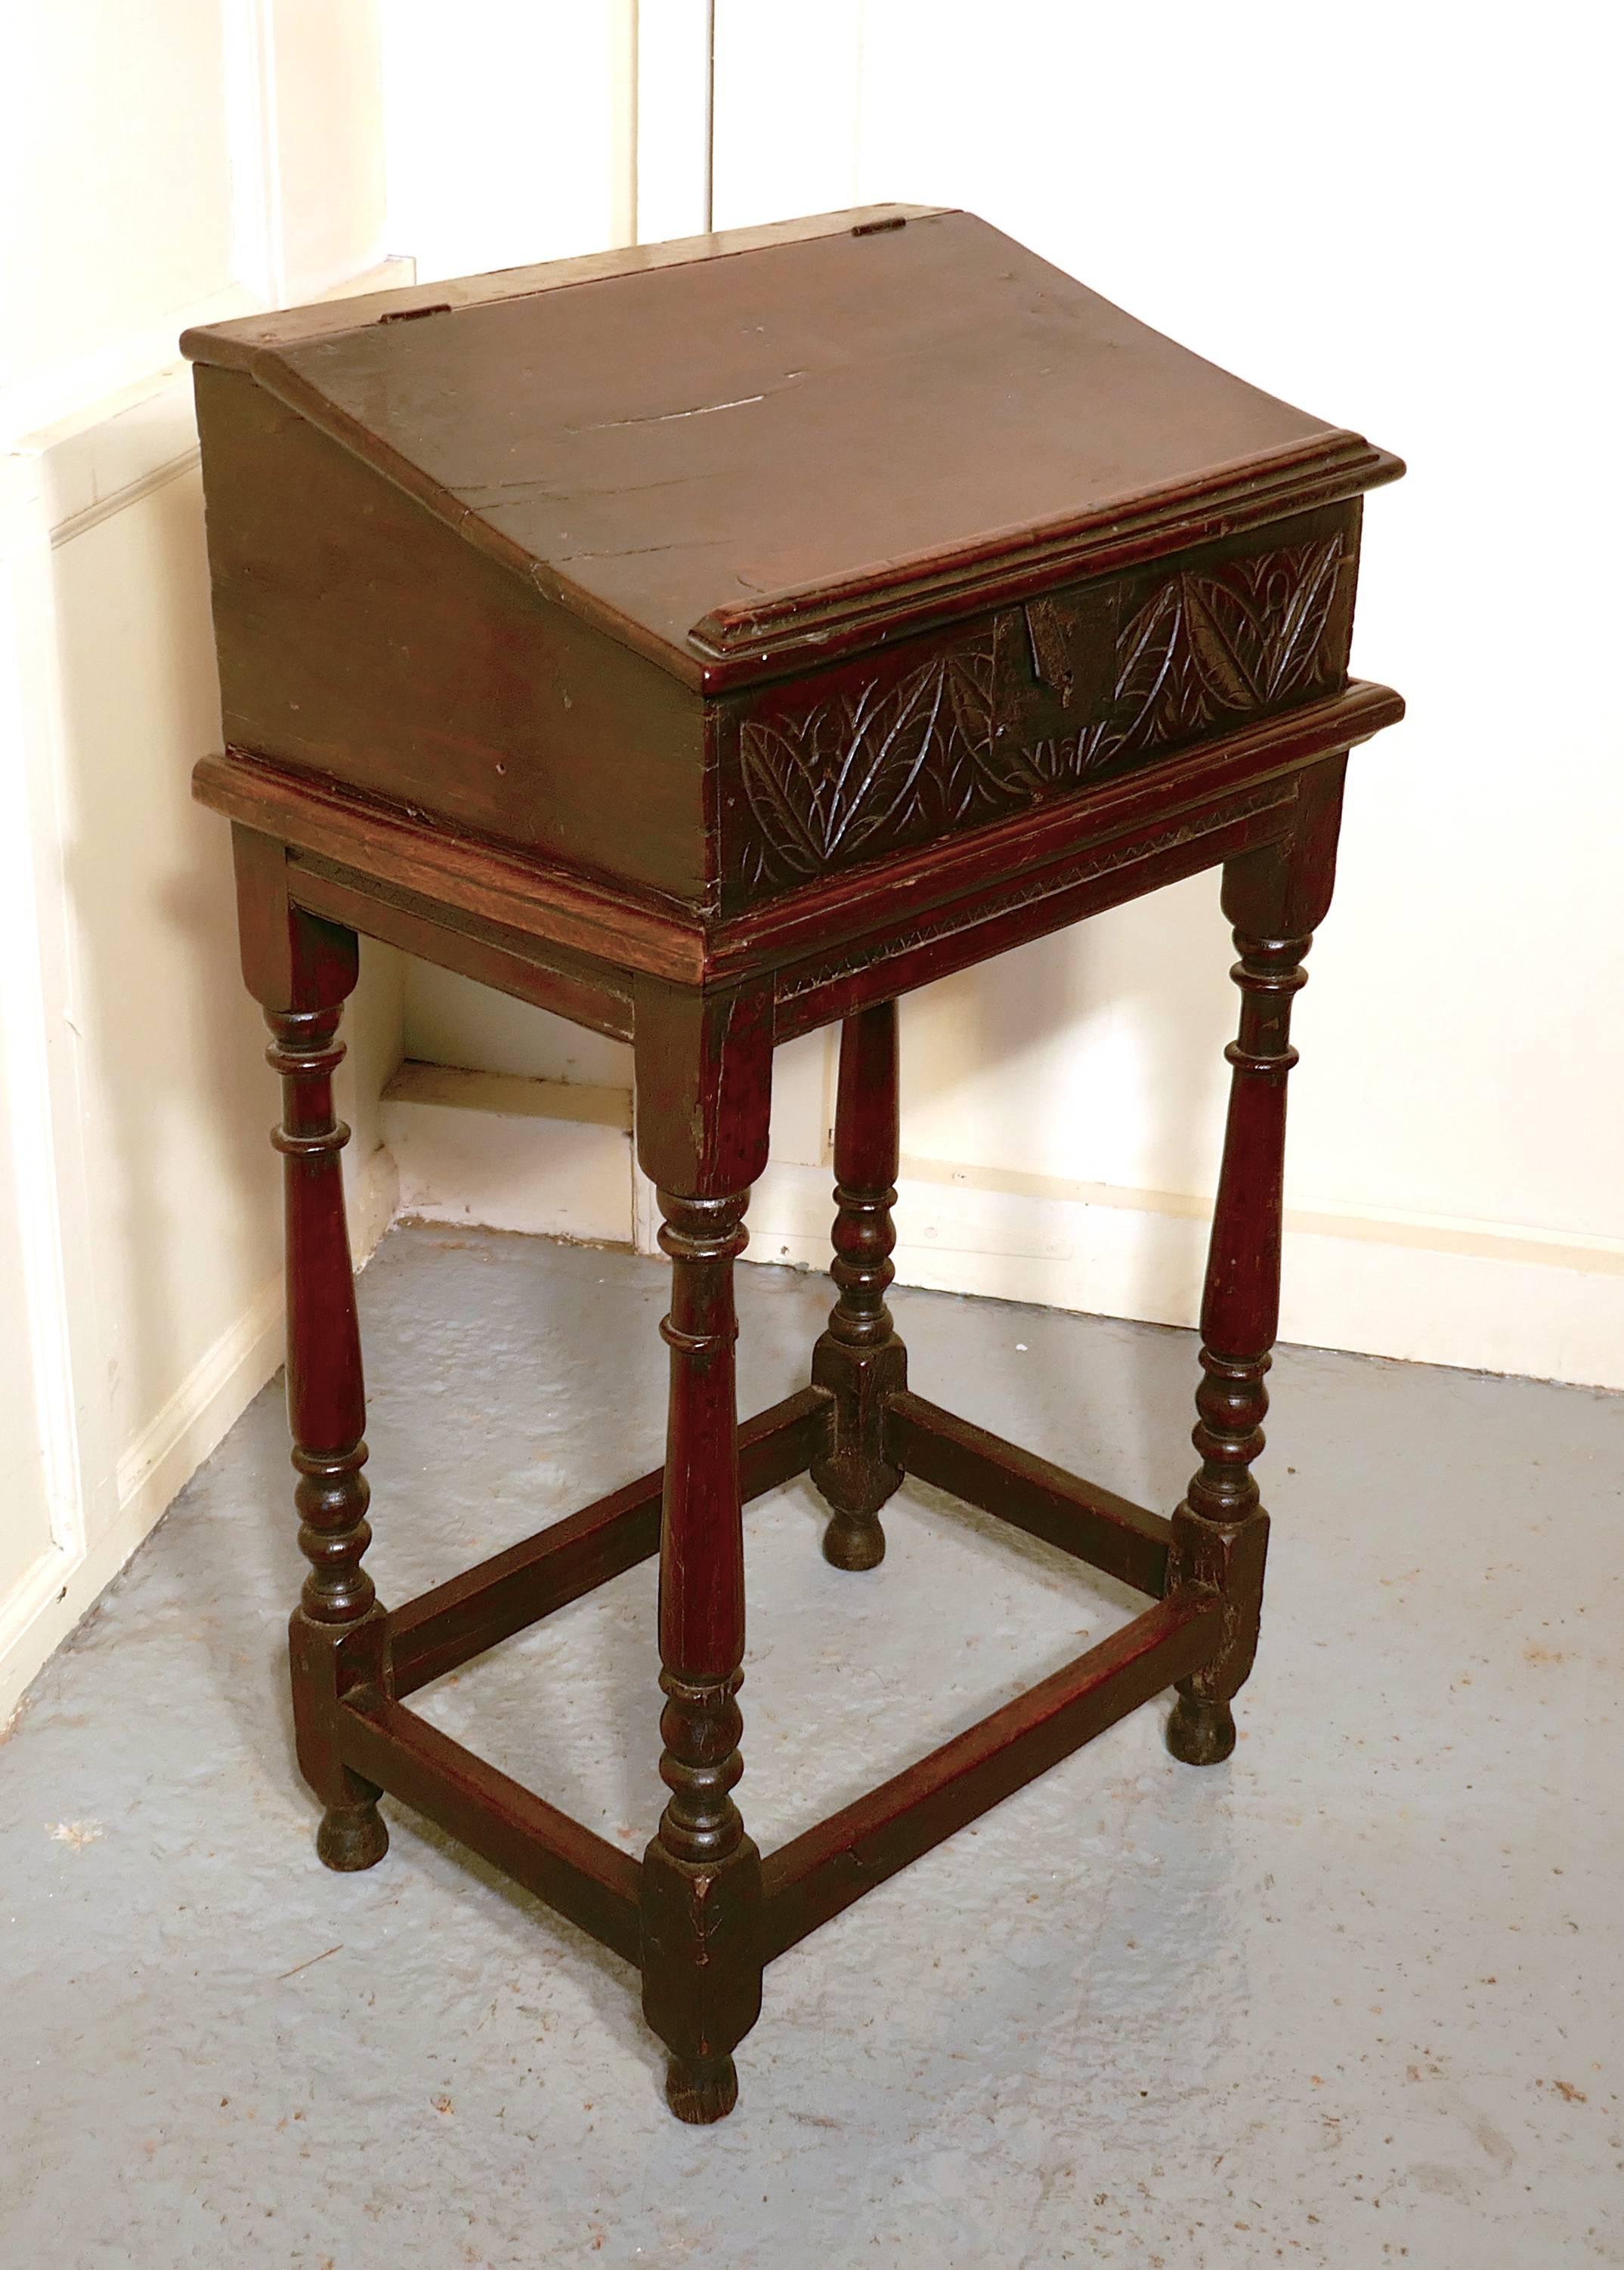 17th century carved oak bible reading slope desk on stand


This is a lovely old Bible box, the desk is in two pieces, the top section would have been for keeping the family bible in. With the lid closed, it can be used as a reading Stand or